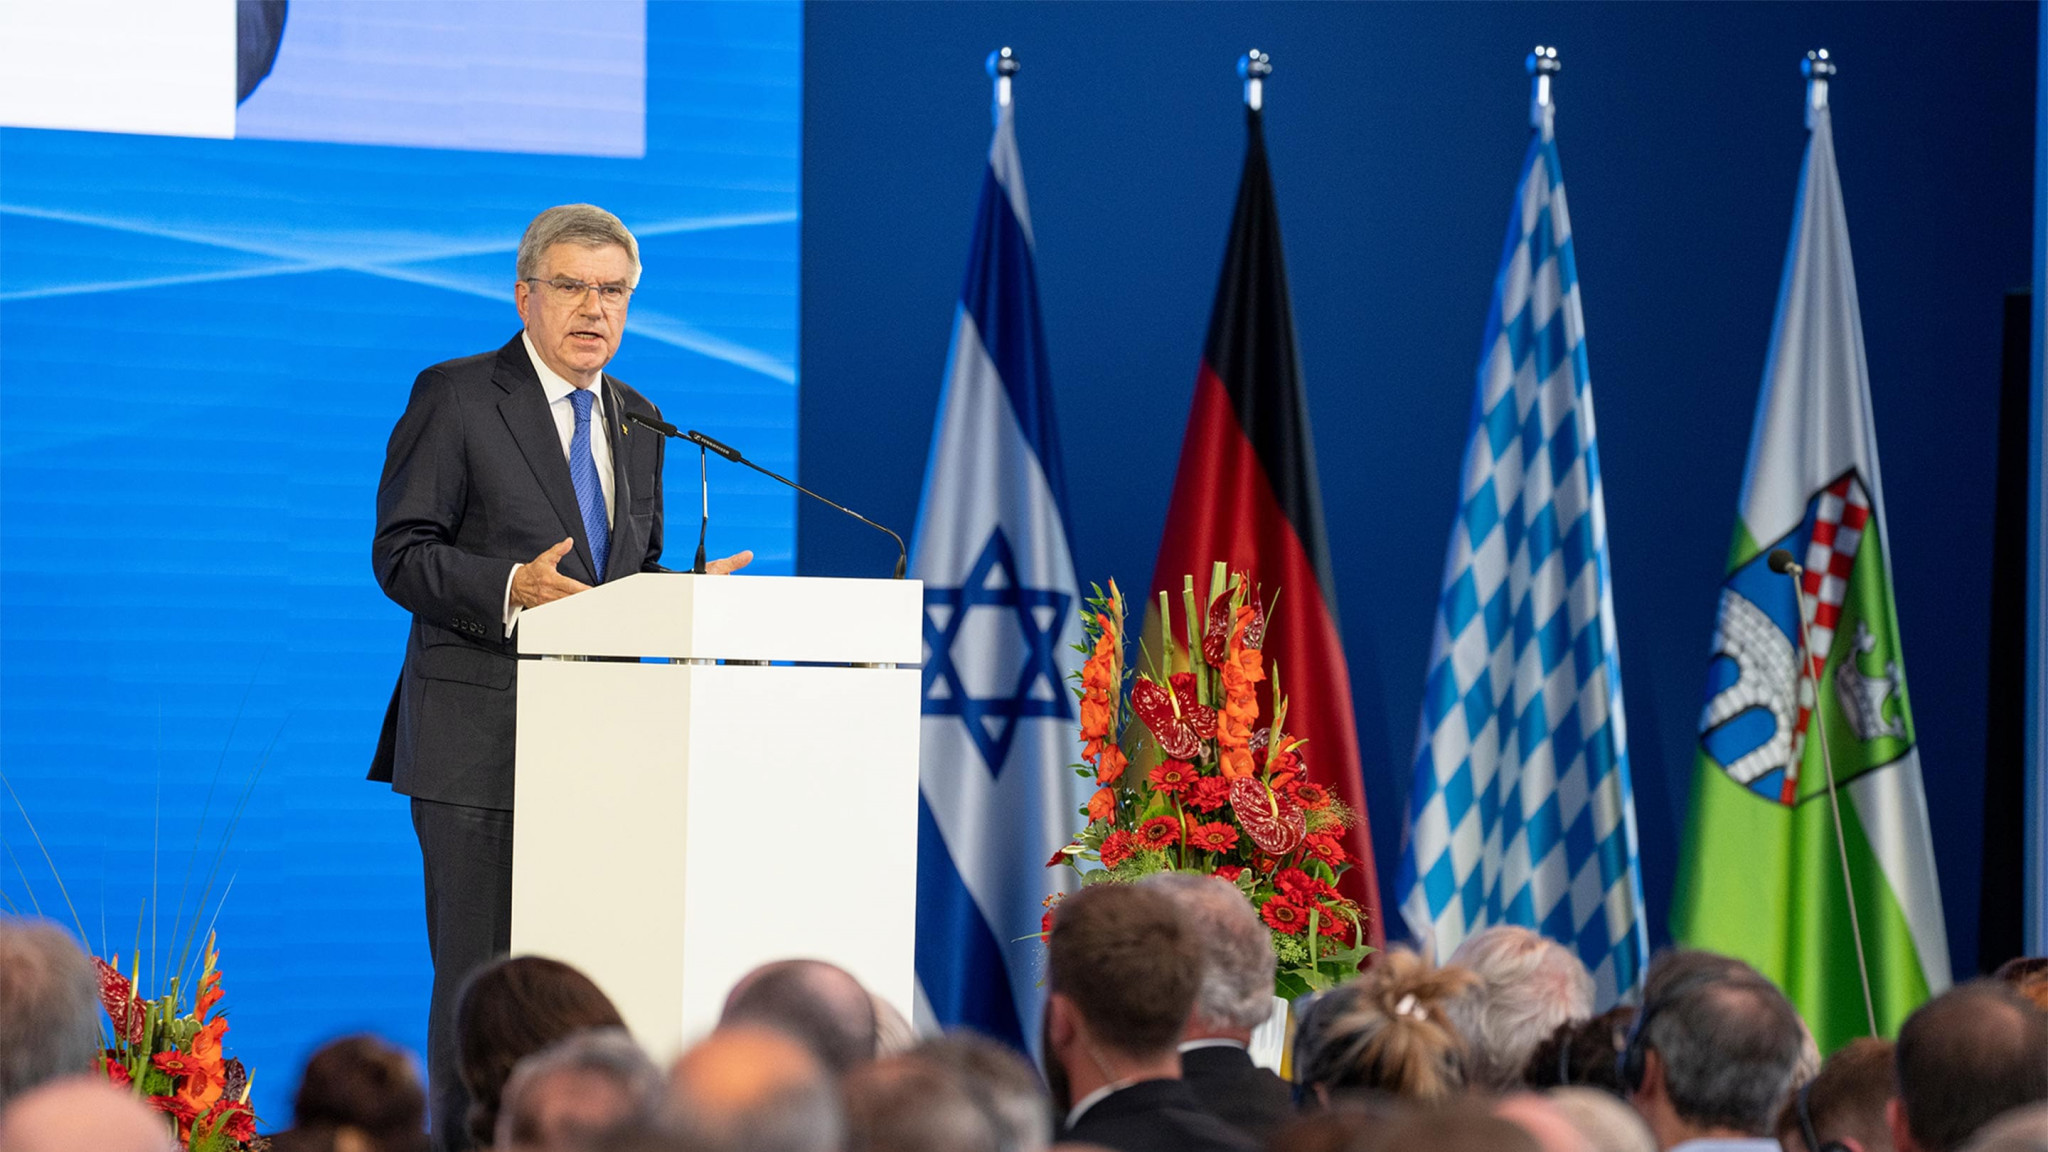 Thomas Bach described the 1972 attack on the Israelis as "cowardly" ©IOC/Greg Martin